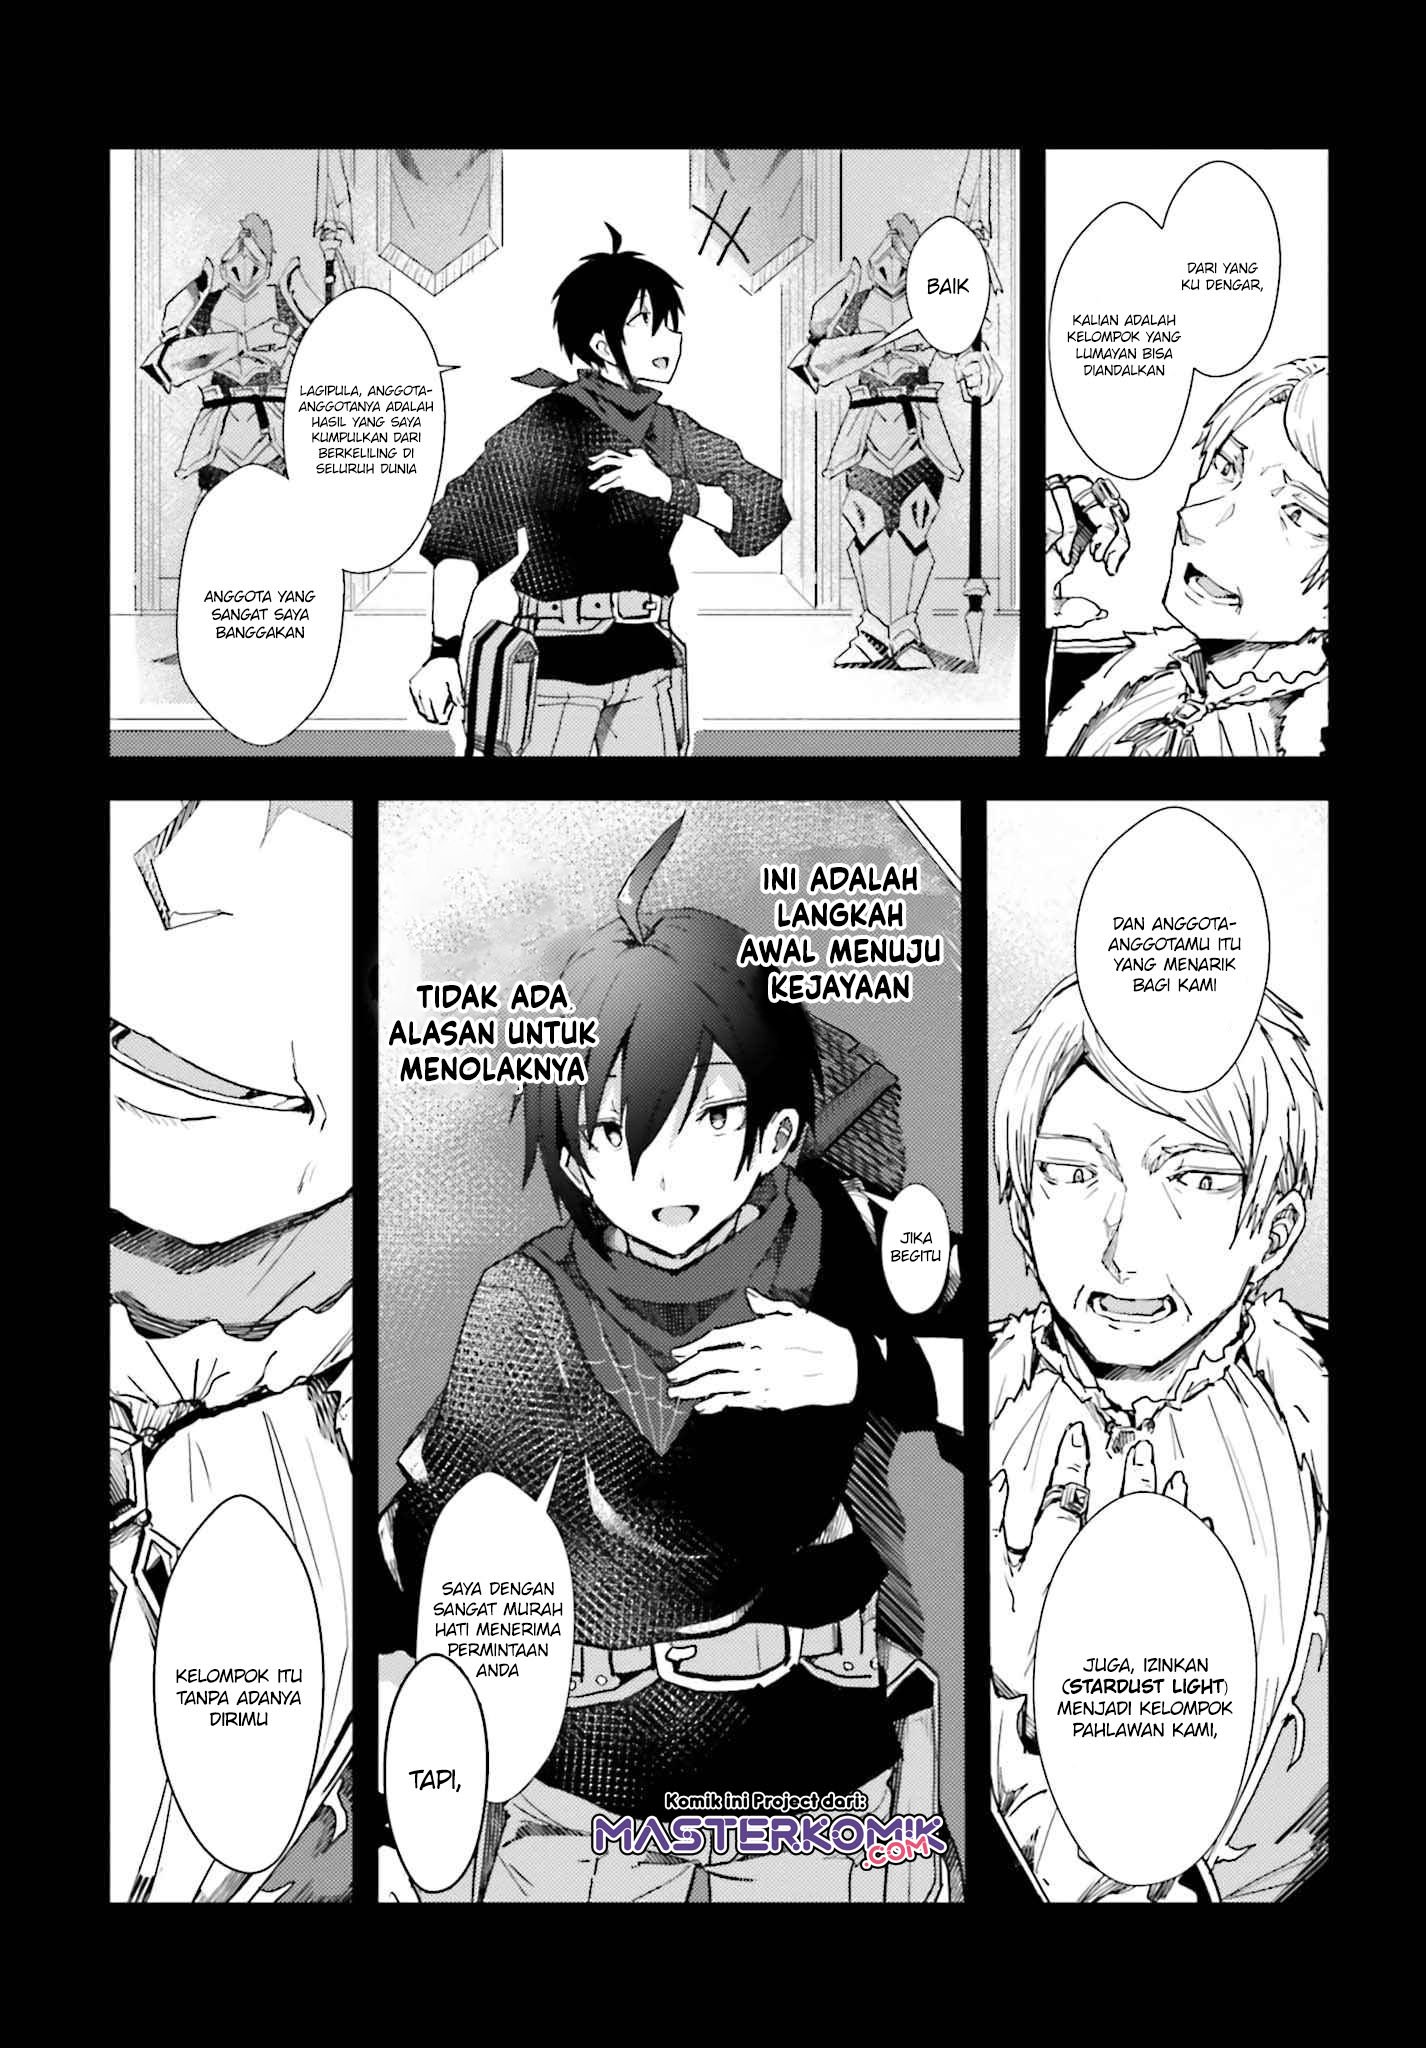 Baca A Heroic Tale About Starting With A Personal Relations Cheat (Ability) And Letting Others Do The Job Chapter 1.1  - GudangKomik